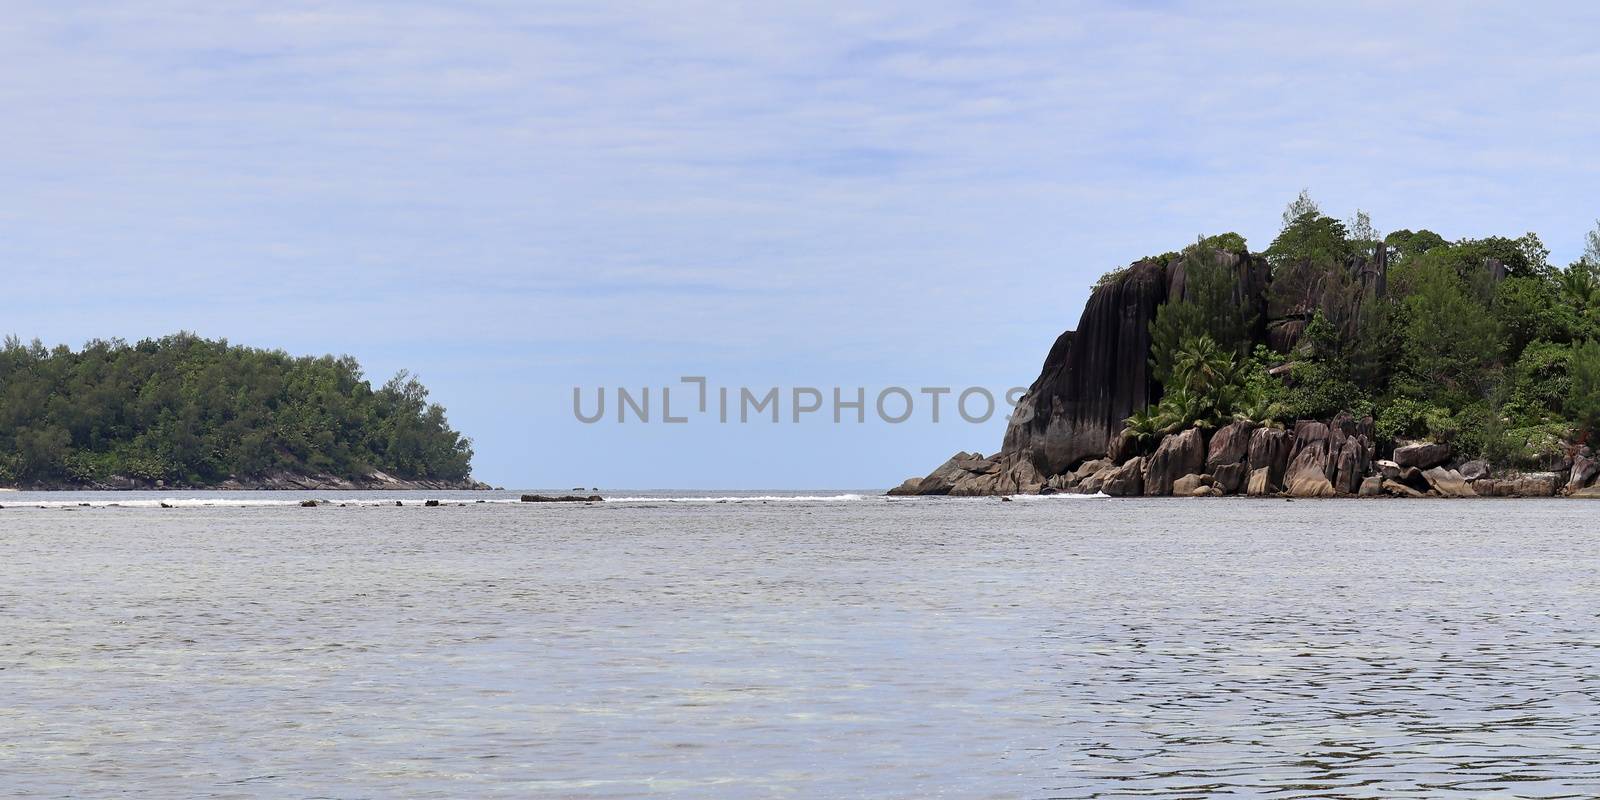 Beautiful impressions of the tropical landscape on the Seychelle by MP_foto71